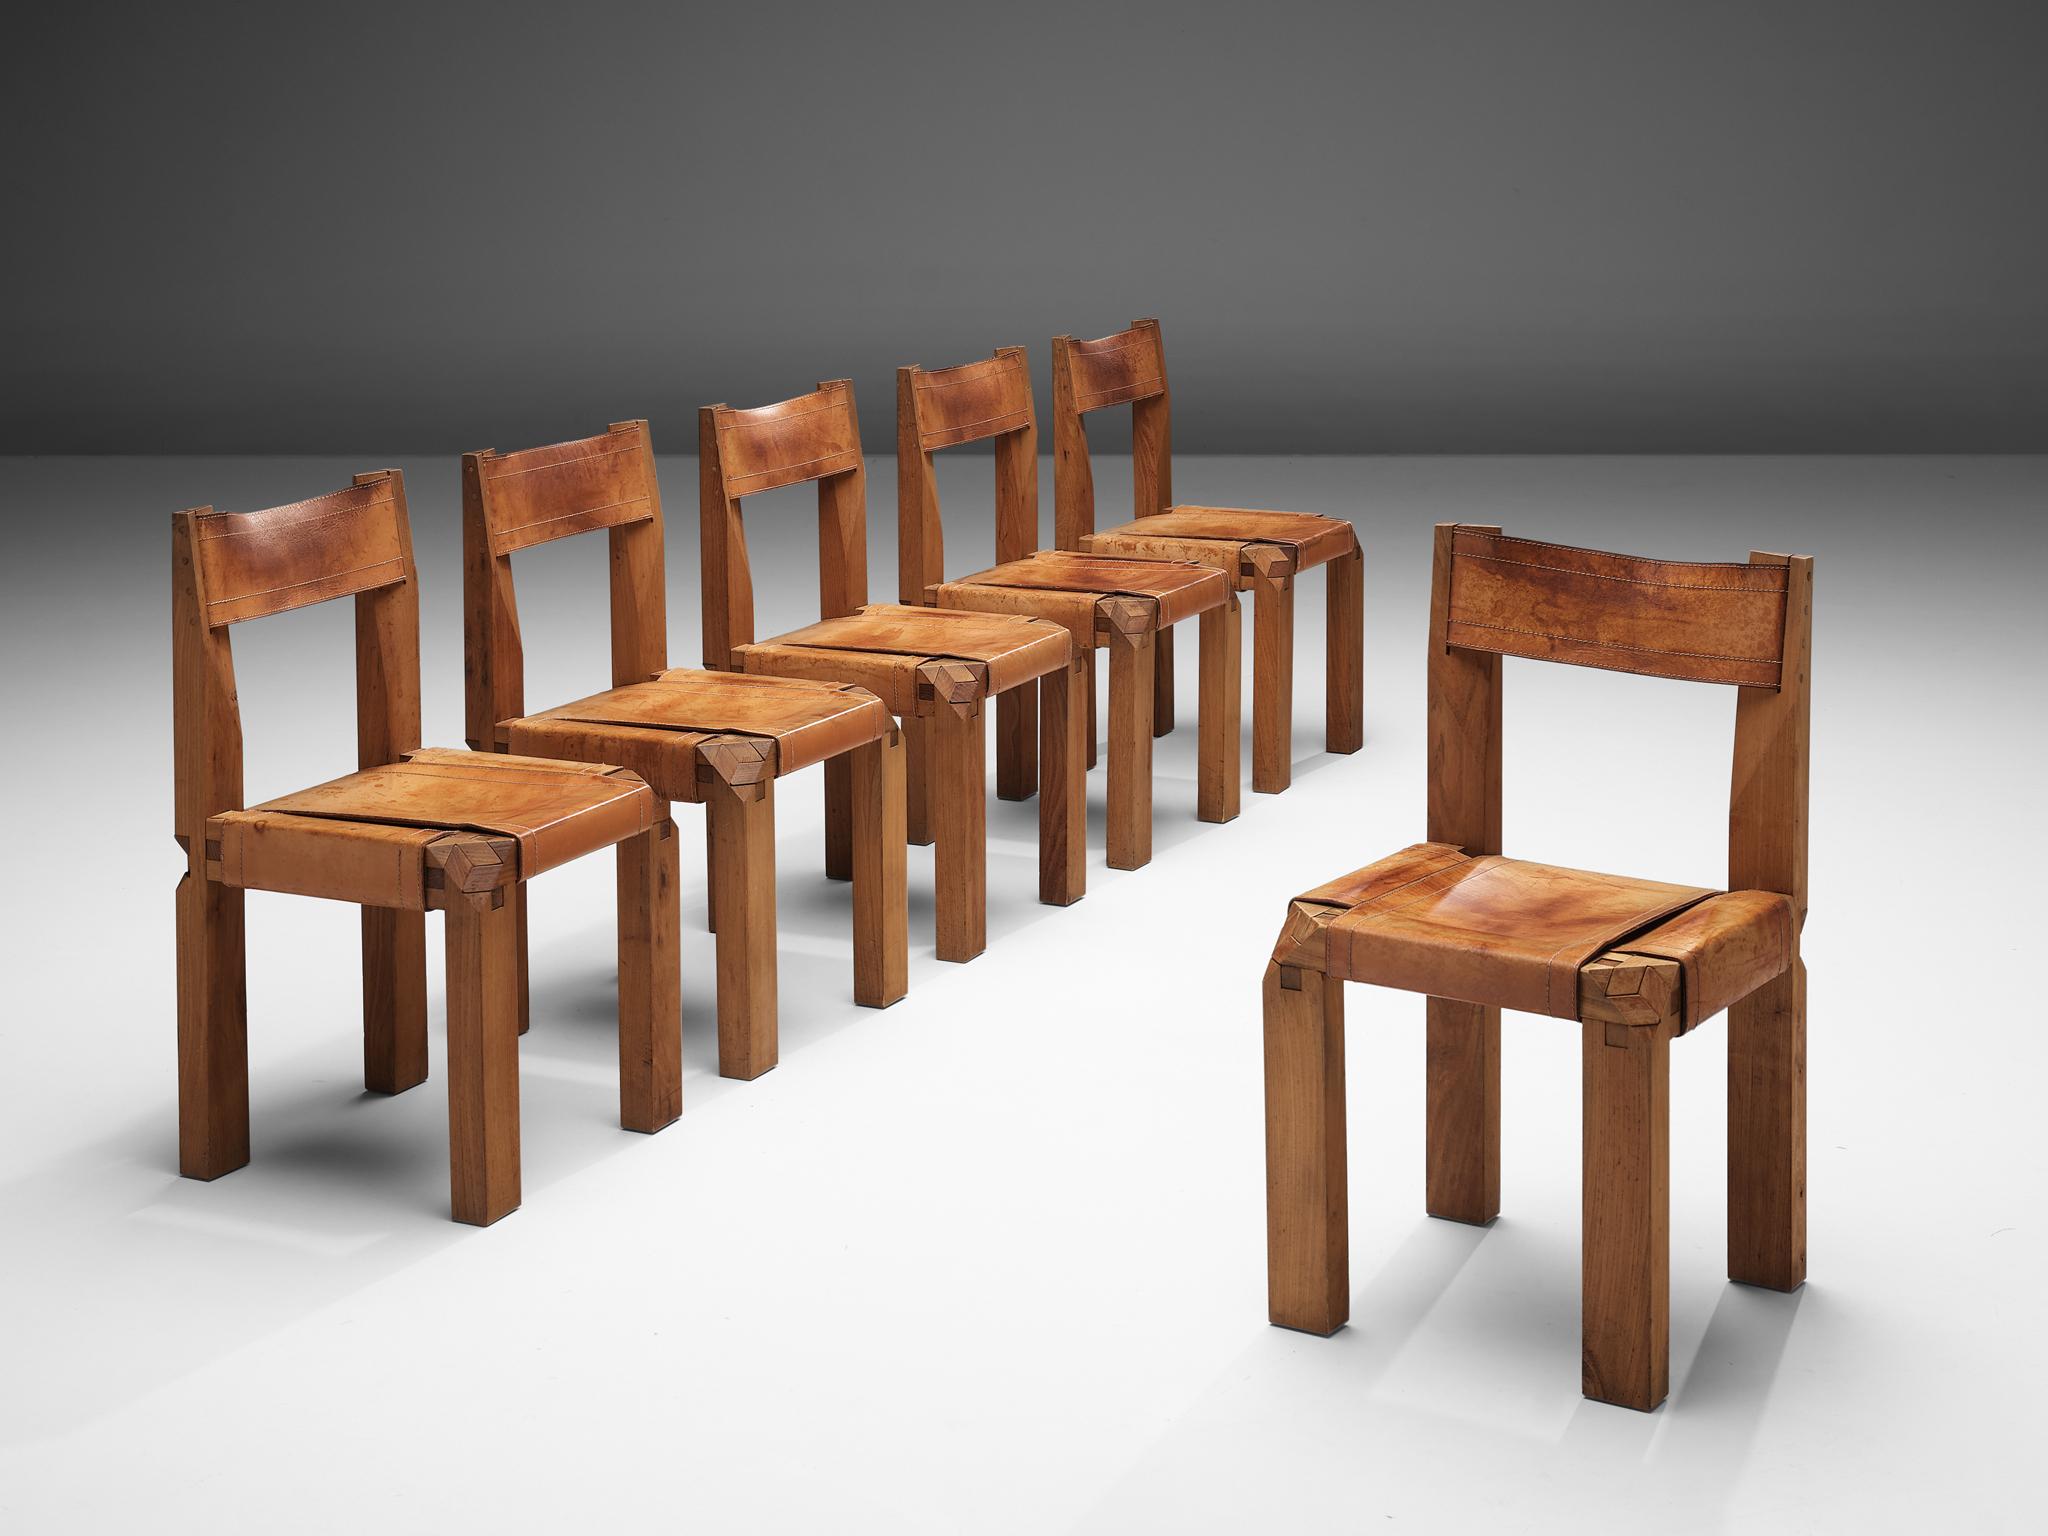 Pierre Chapo, dining chairs model 'S11', elm, leather, France, circa 1966.

This set is an early edition designed by Pierre Chapo, known for his hallmark use of solid elmwood and a commitment to pure and clean design and construction principles. Set